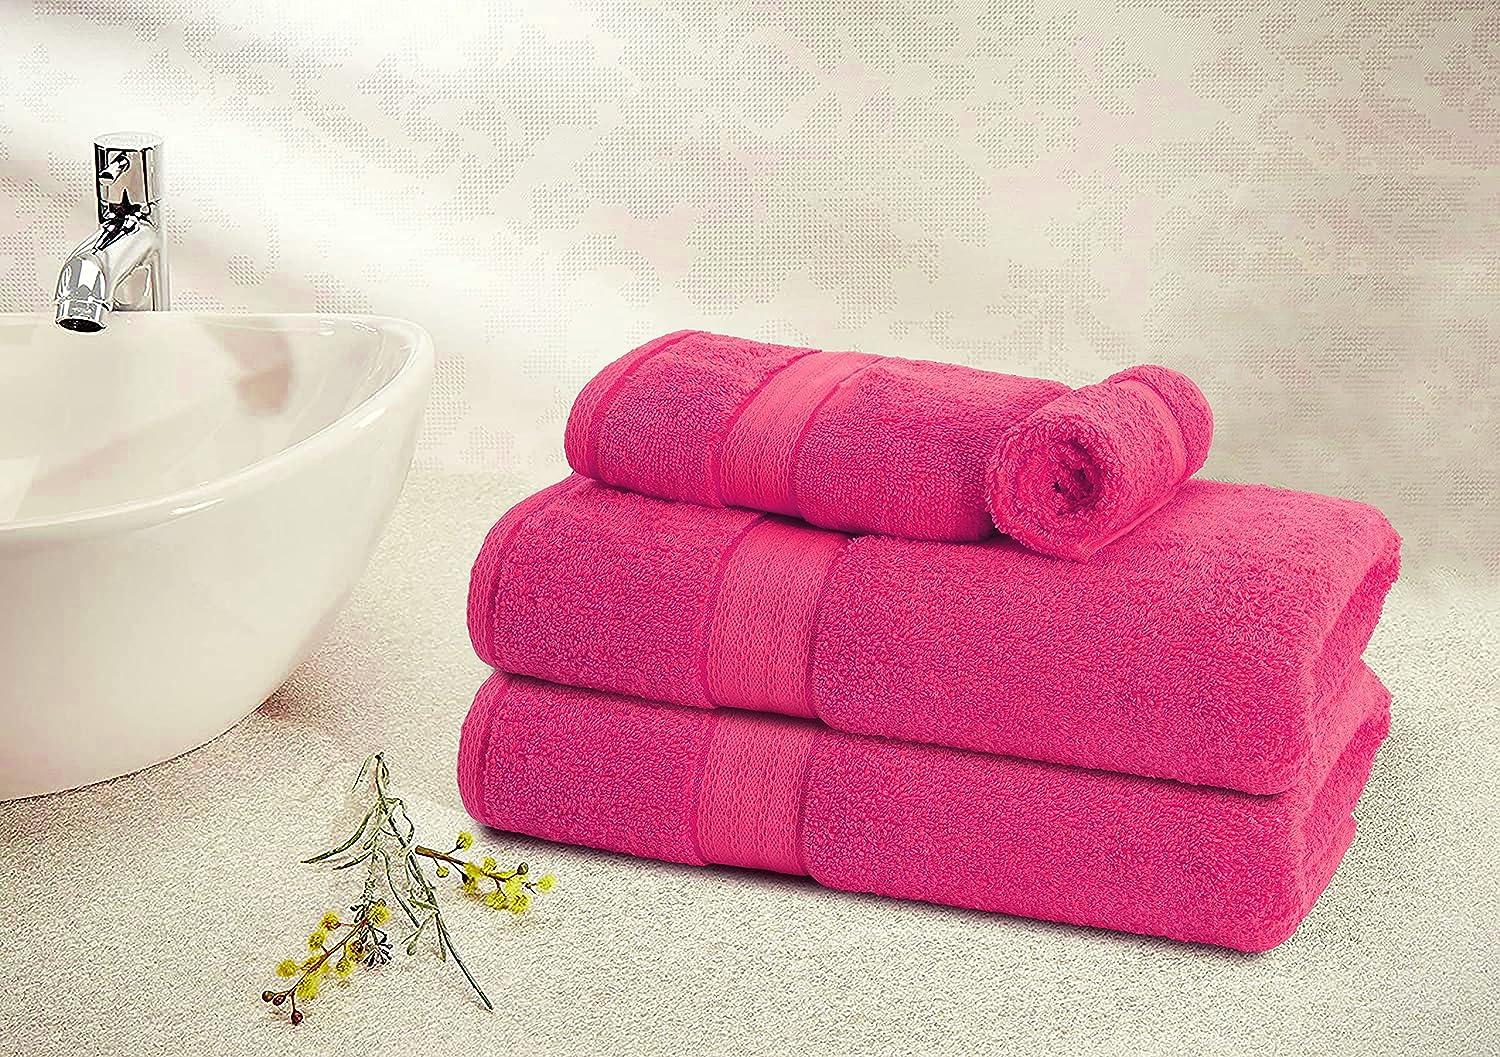 Luxury Hotel Collection Bath Towels (700GSM) - 100% Combed Cotton - 6 Pcs